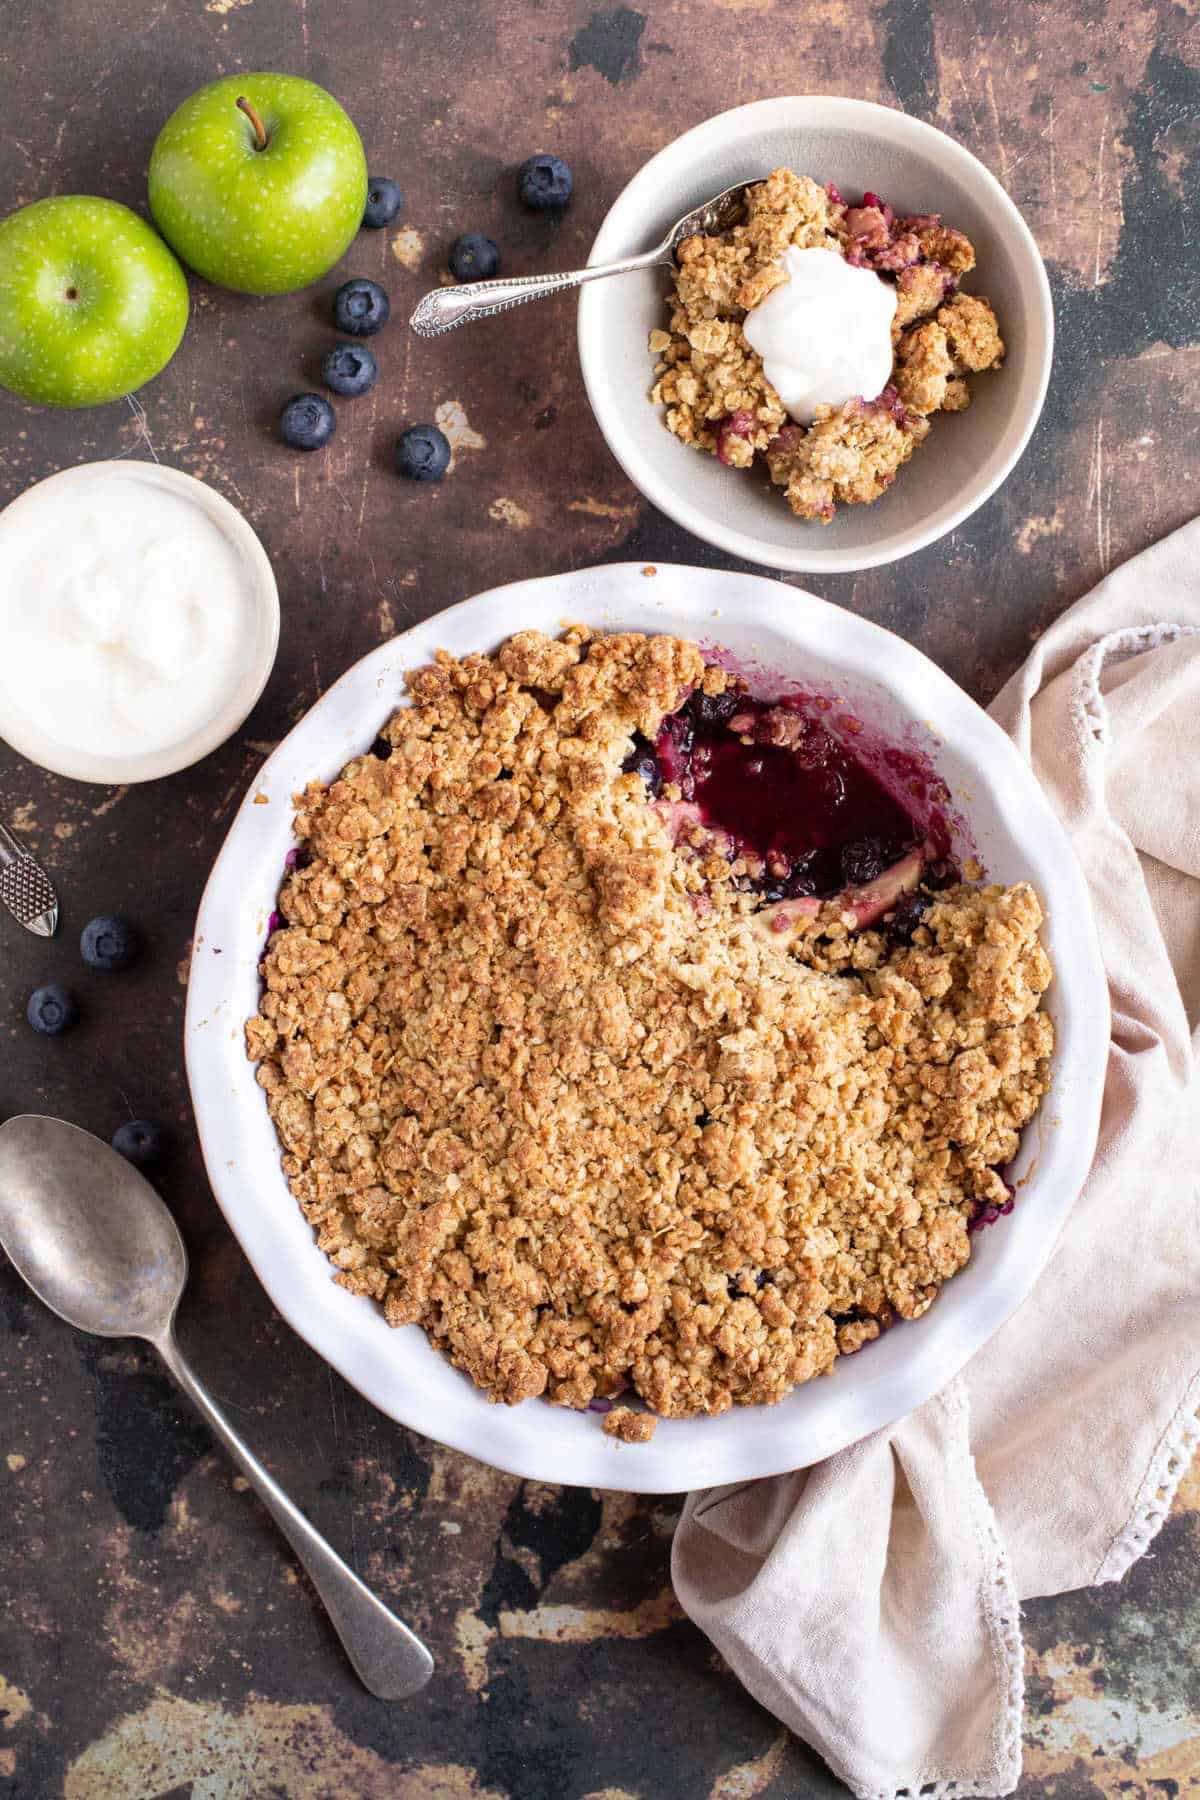 Apple and blueberry crumble in a bowl served with yogurt.